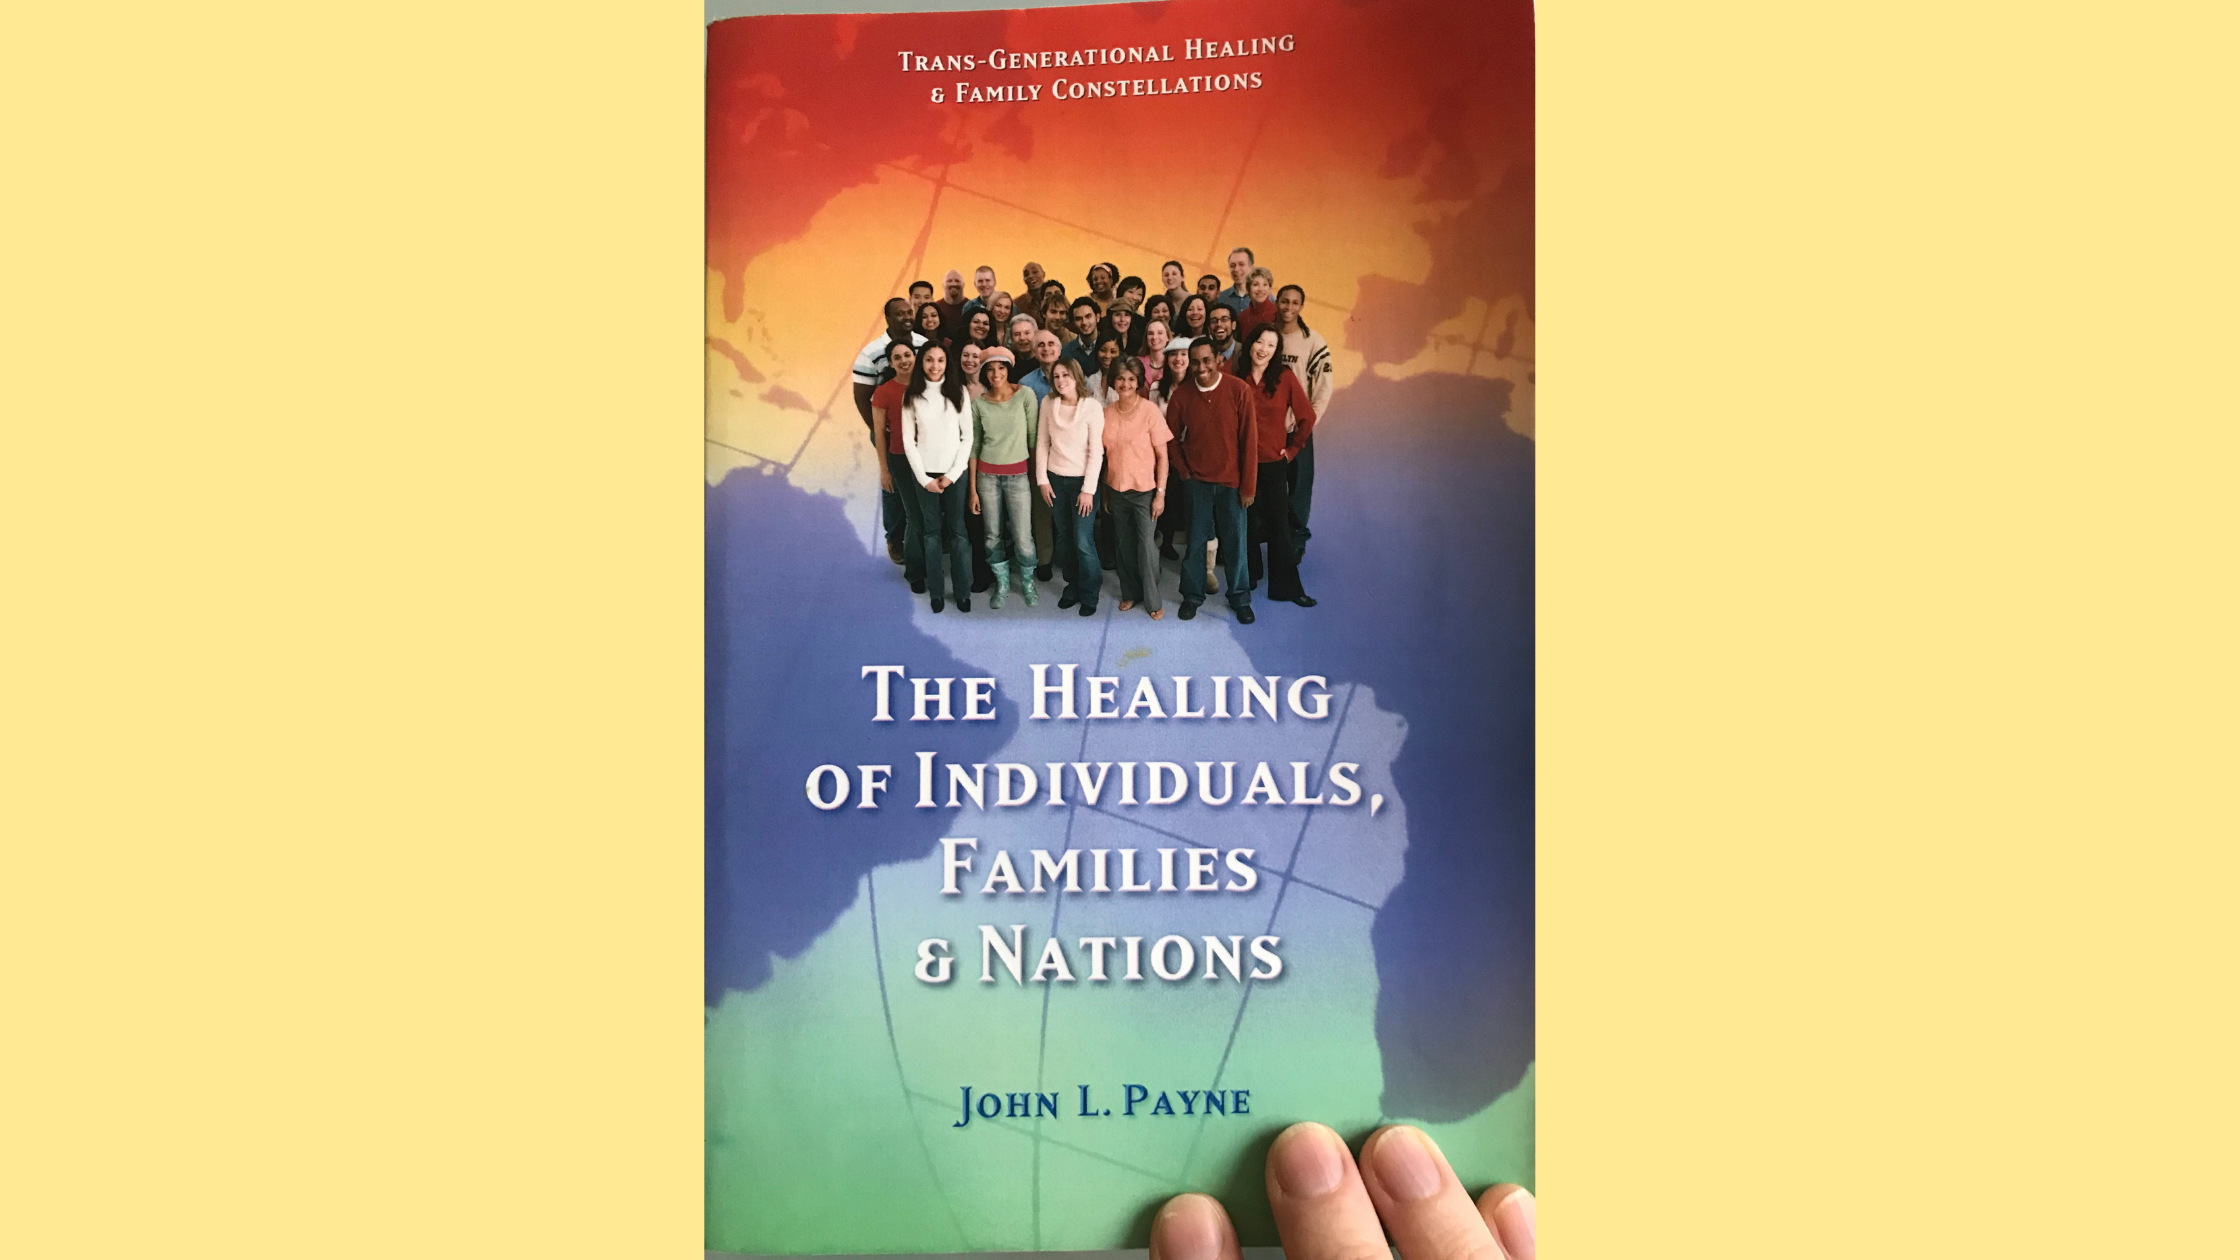 The healing of individuals, families and nations